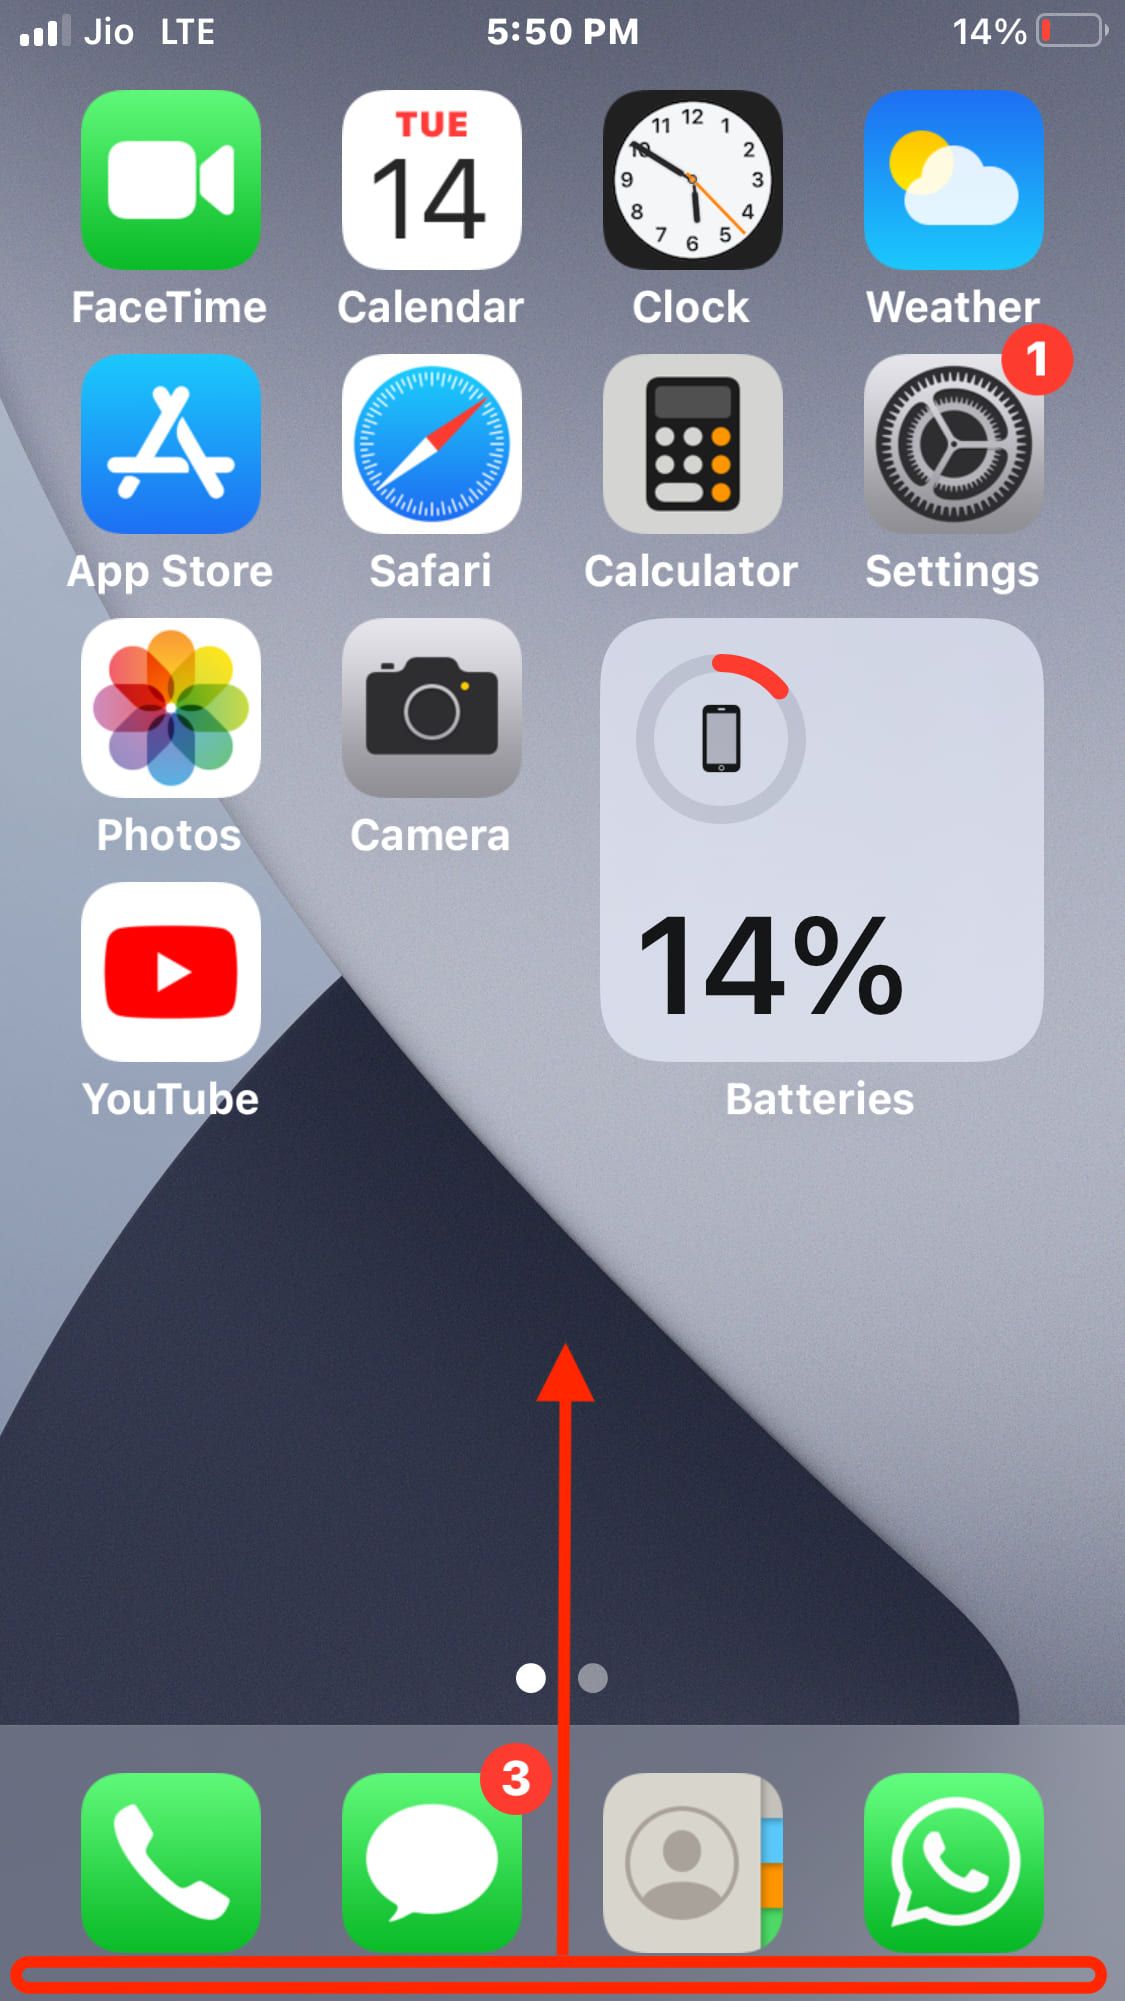 Swipe up from bottom of the screen on iPhone with Home Button